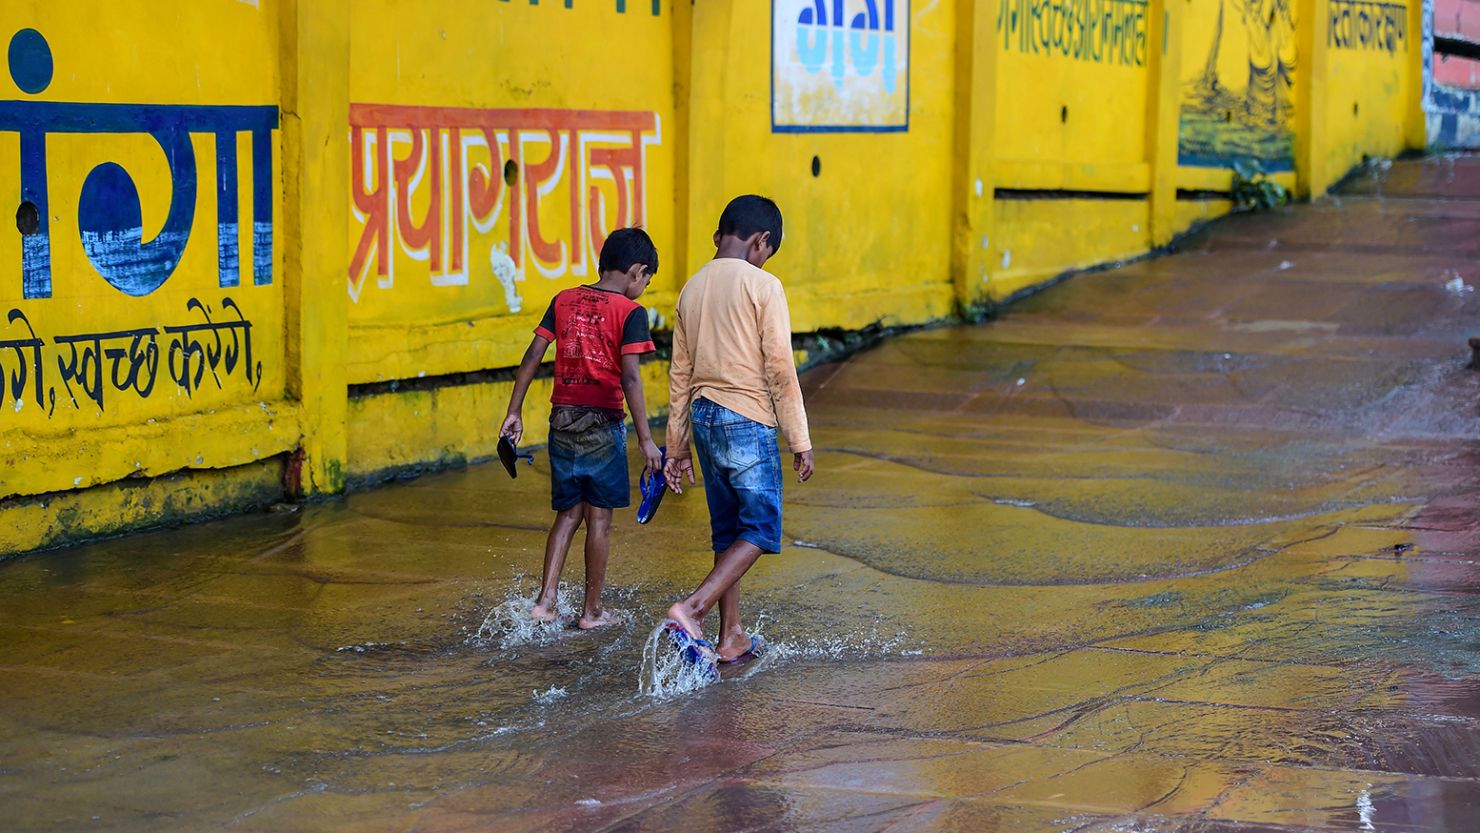 Children play in the rain water during heavy rain in Allahabad on August 19, 2020. (Photo by SANJAY KANOJIA / AFP) (Photo by SANJAY KANOJIA/AFP via Getty Images)